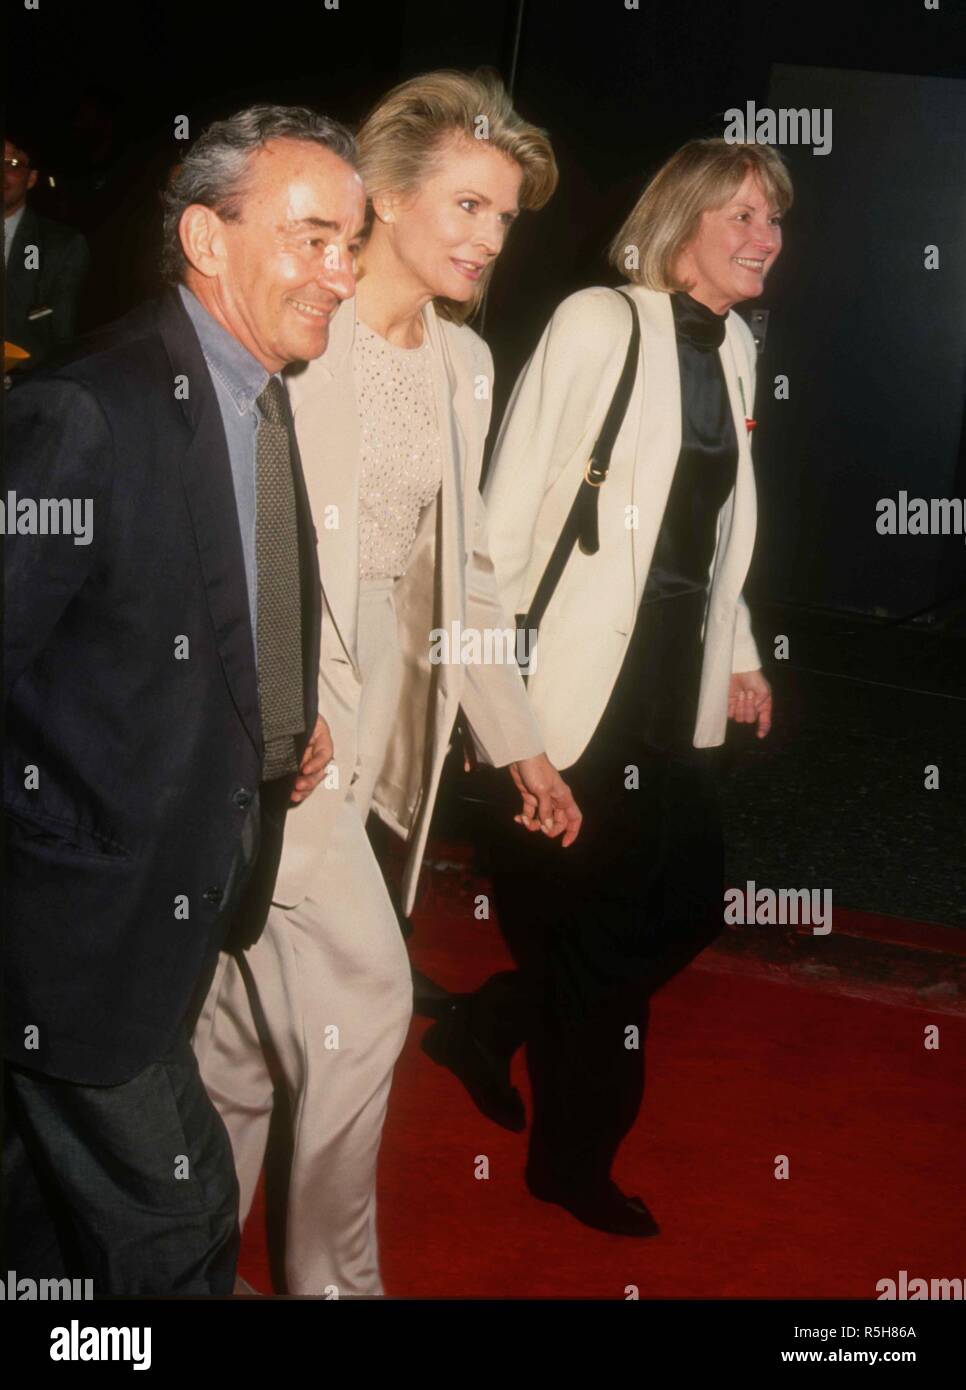 UNIVERSAL CITY, CA - MARCH 9: Director Louis Malle, wife actress Candice Bergen and publicist Pat Kingsley attend the 19th Annual People's Choice Awards on March 9, 1993 at Unversal Studios in Universal City, California. Photo by Barry King/Alamy Stock Photo Stock Photo